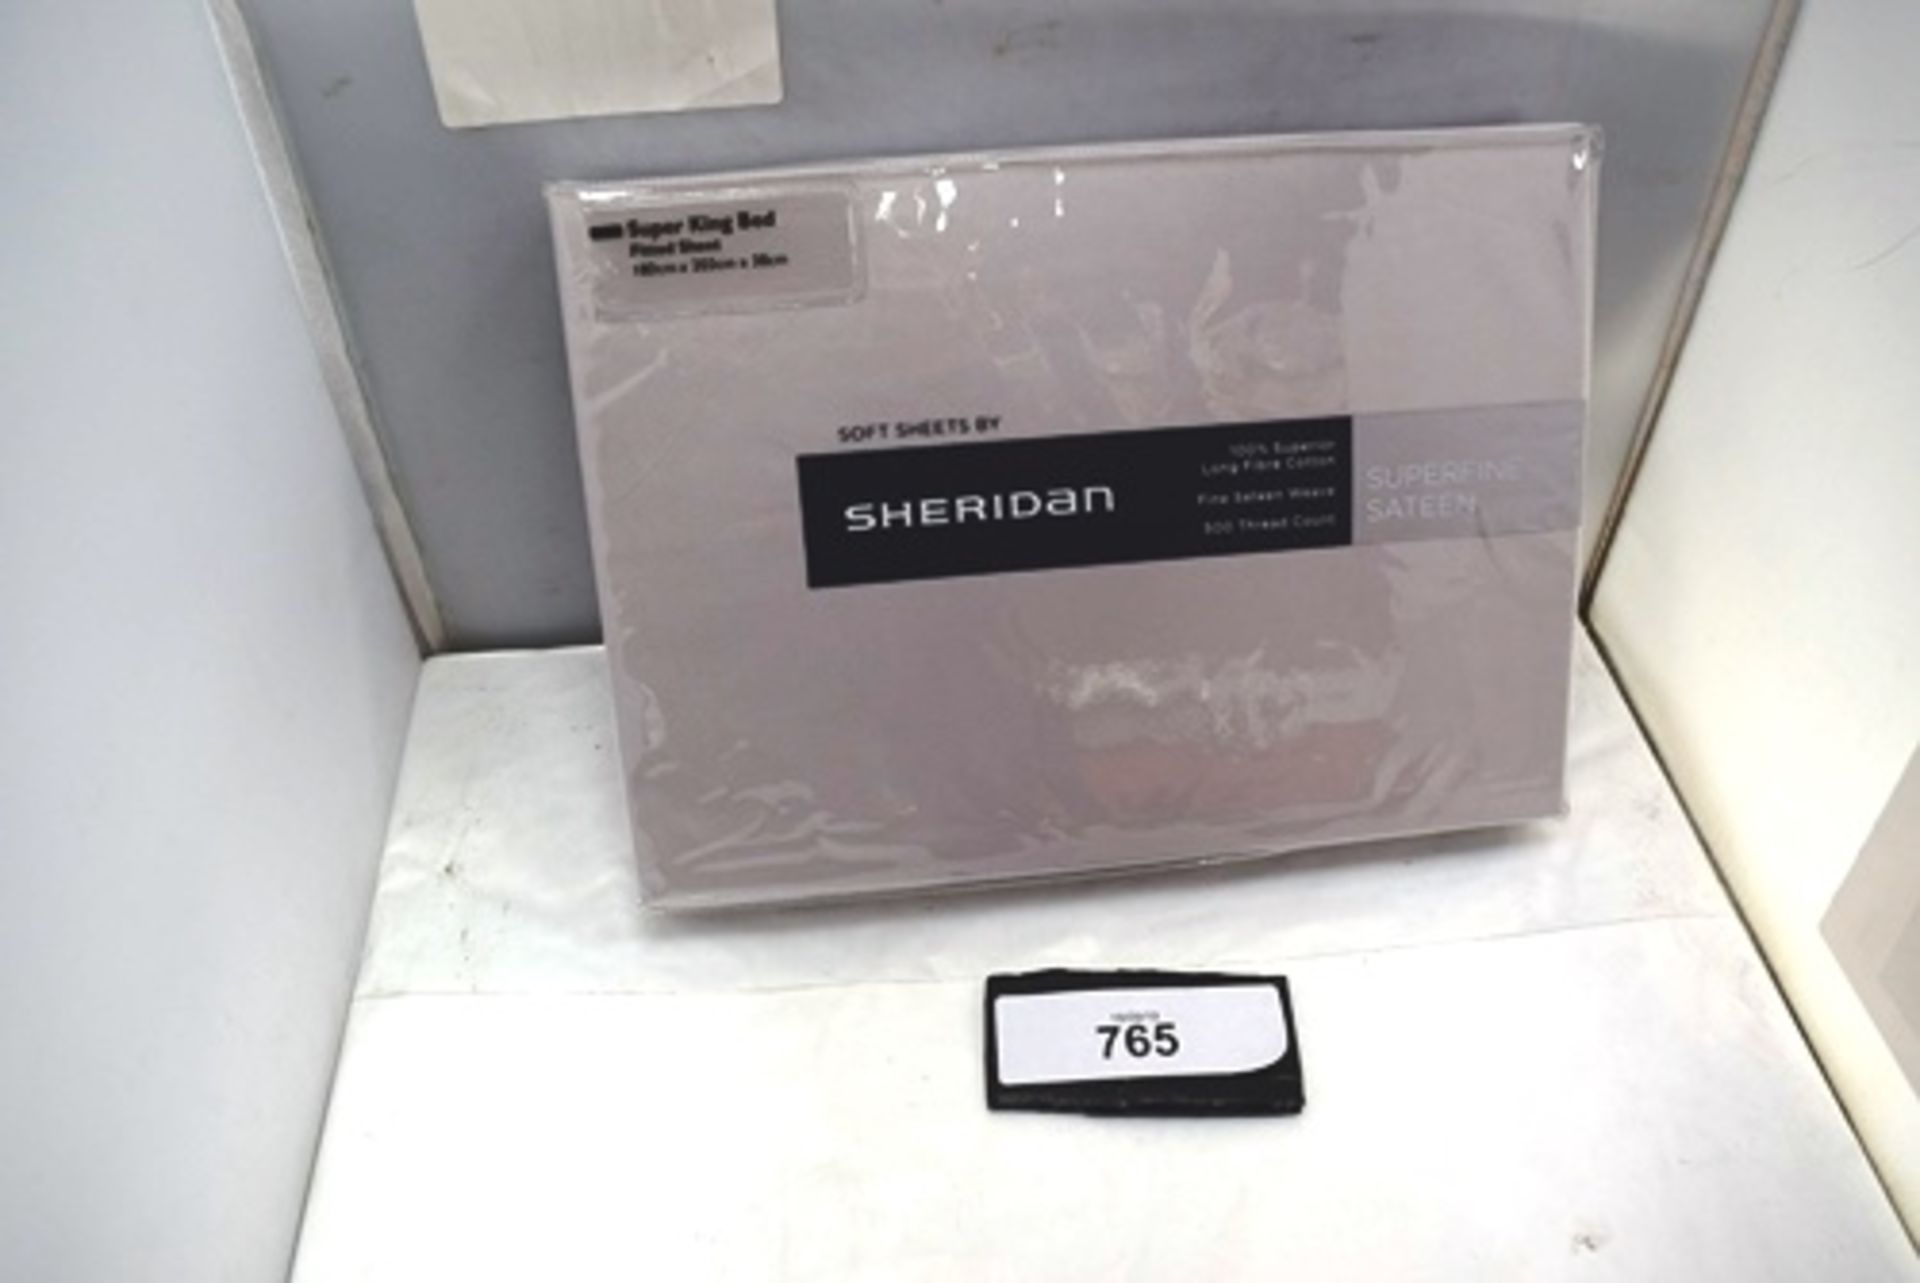 2 x Sheridan silver super fine sateen super king bed fitted sheets, RRP £85.00 each - New in pack (